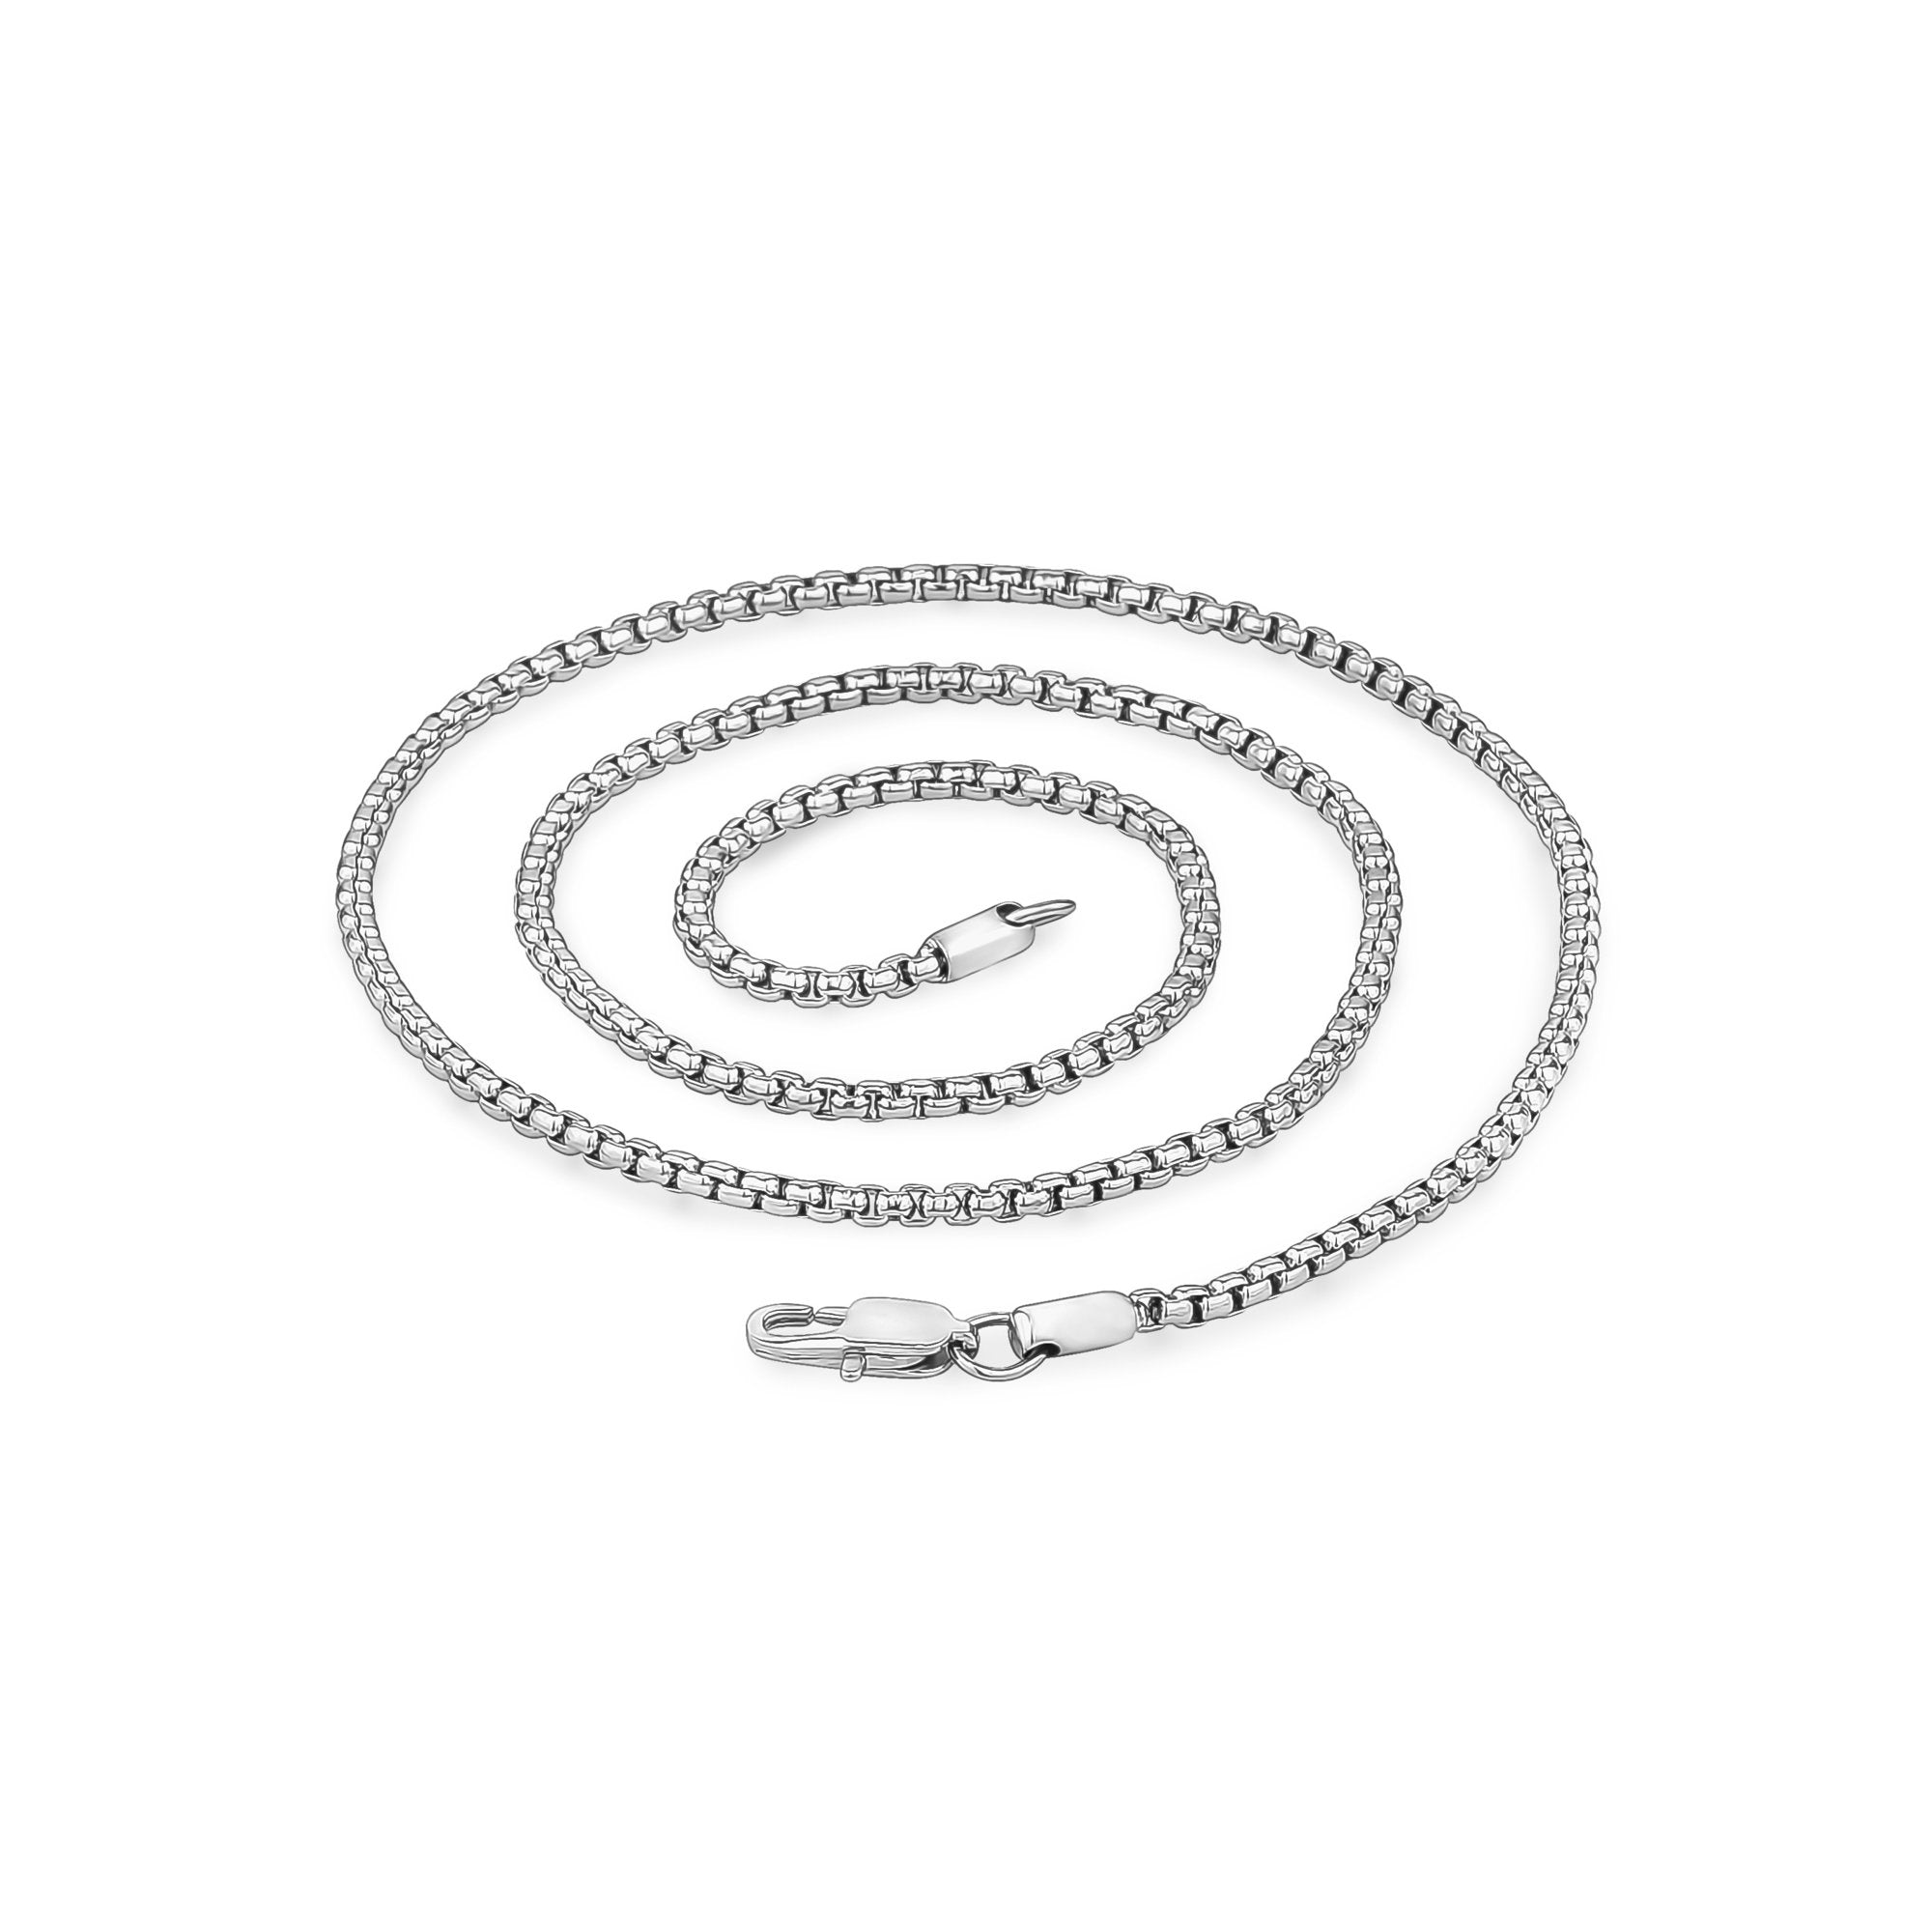 Box Link Necklace Chain (3mm) - Black – Loralyn Designs